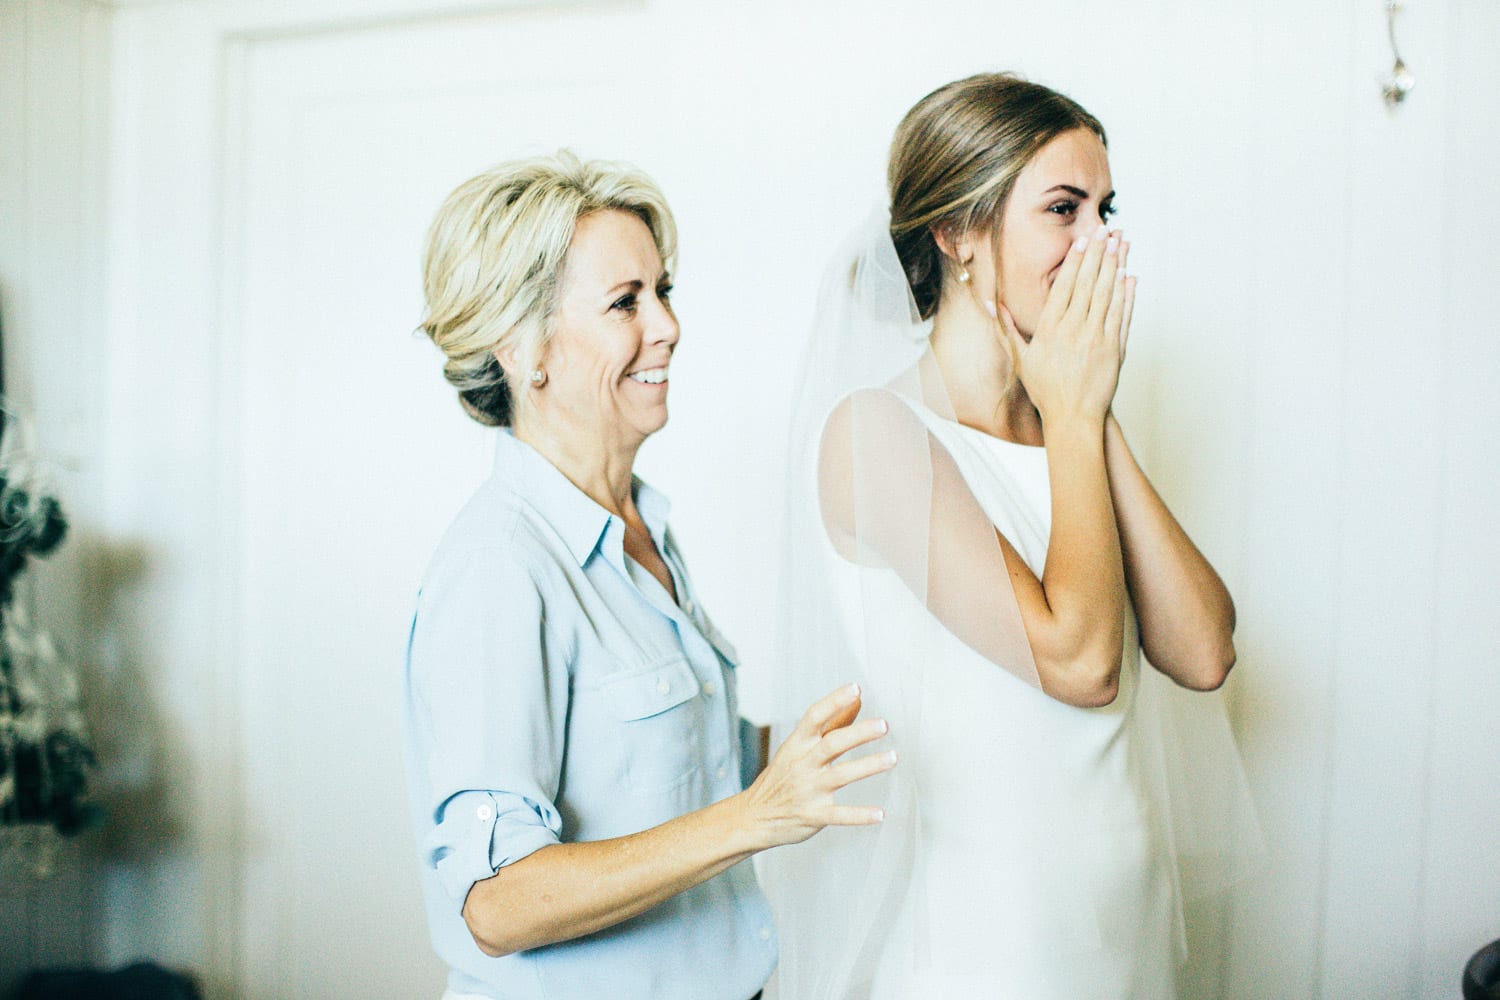 Bride and mother of the bride react to the mirror